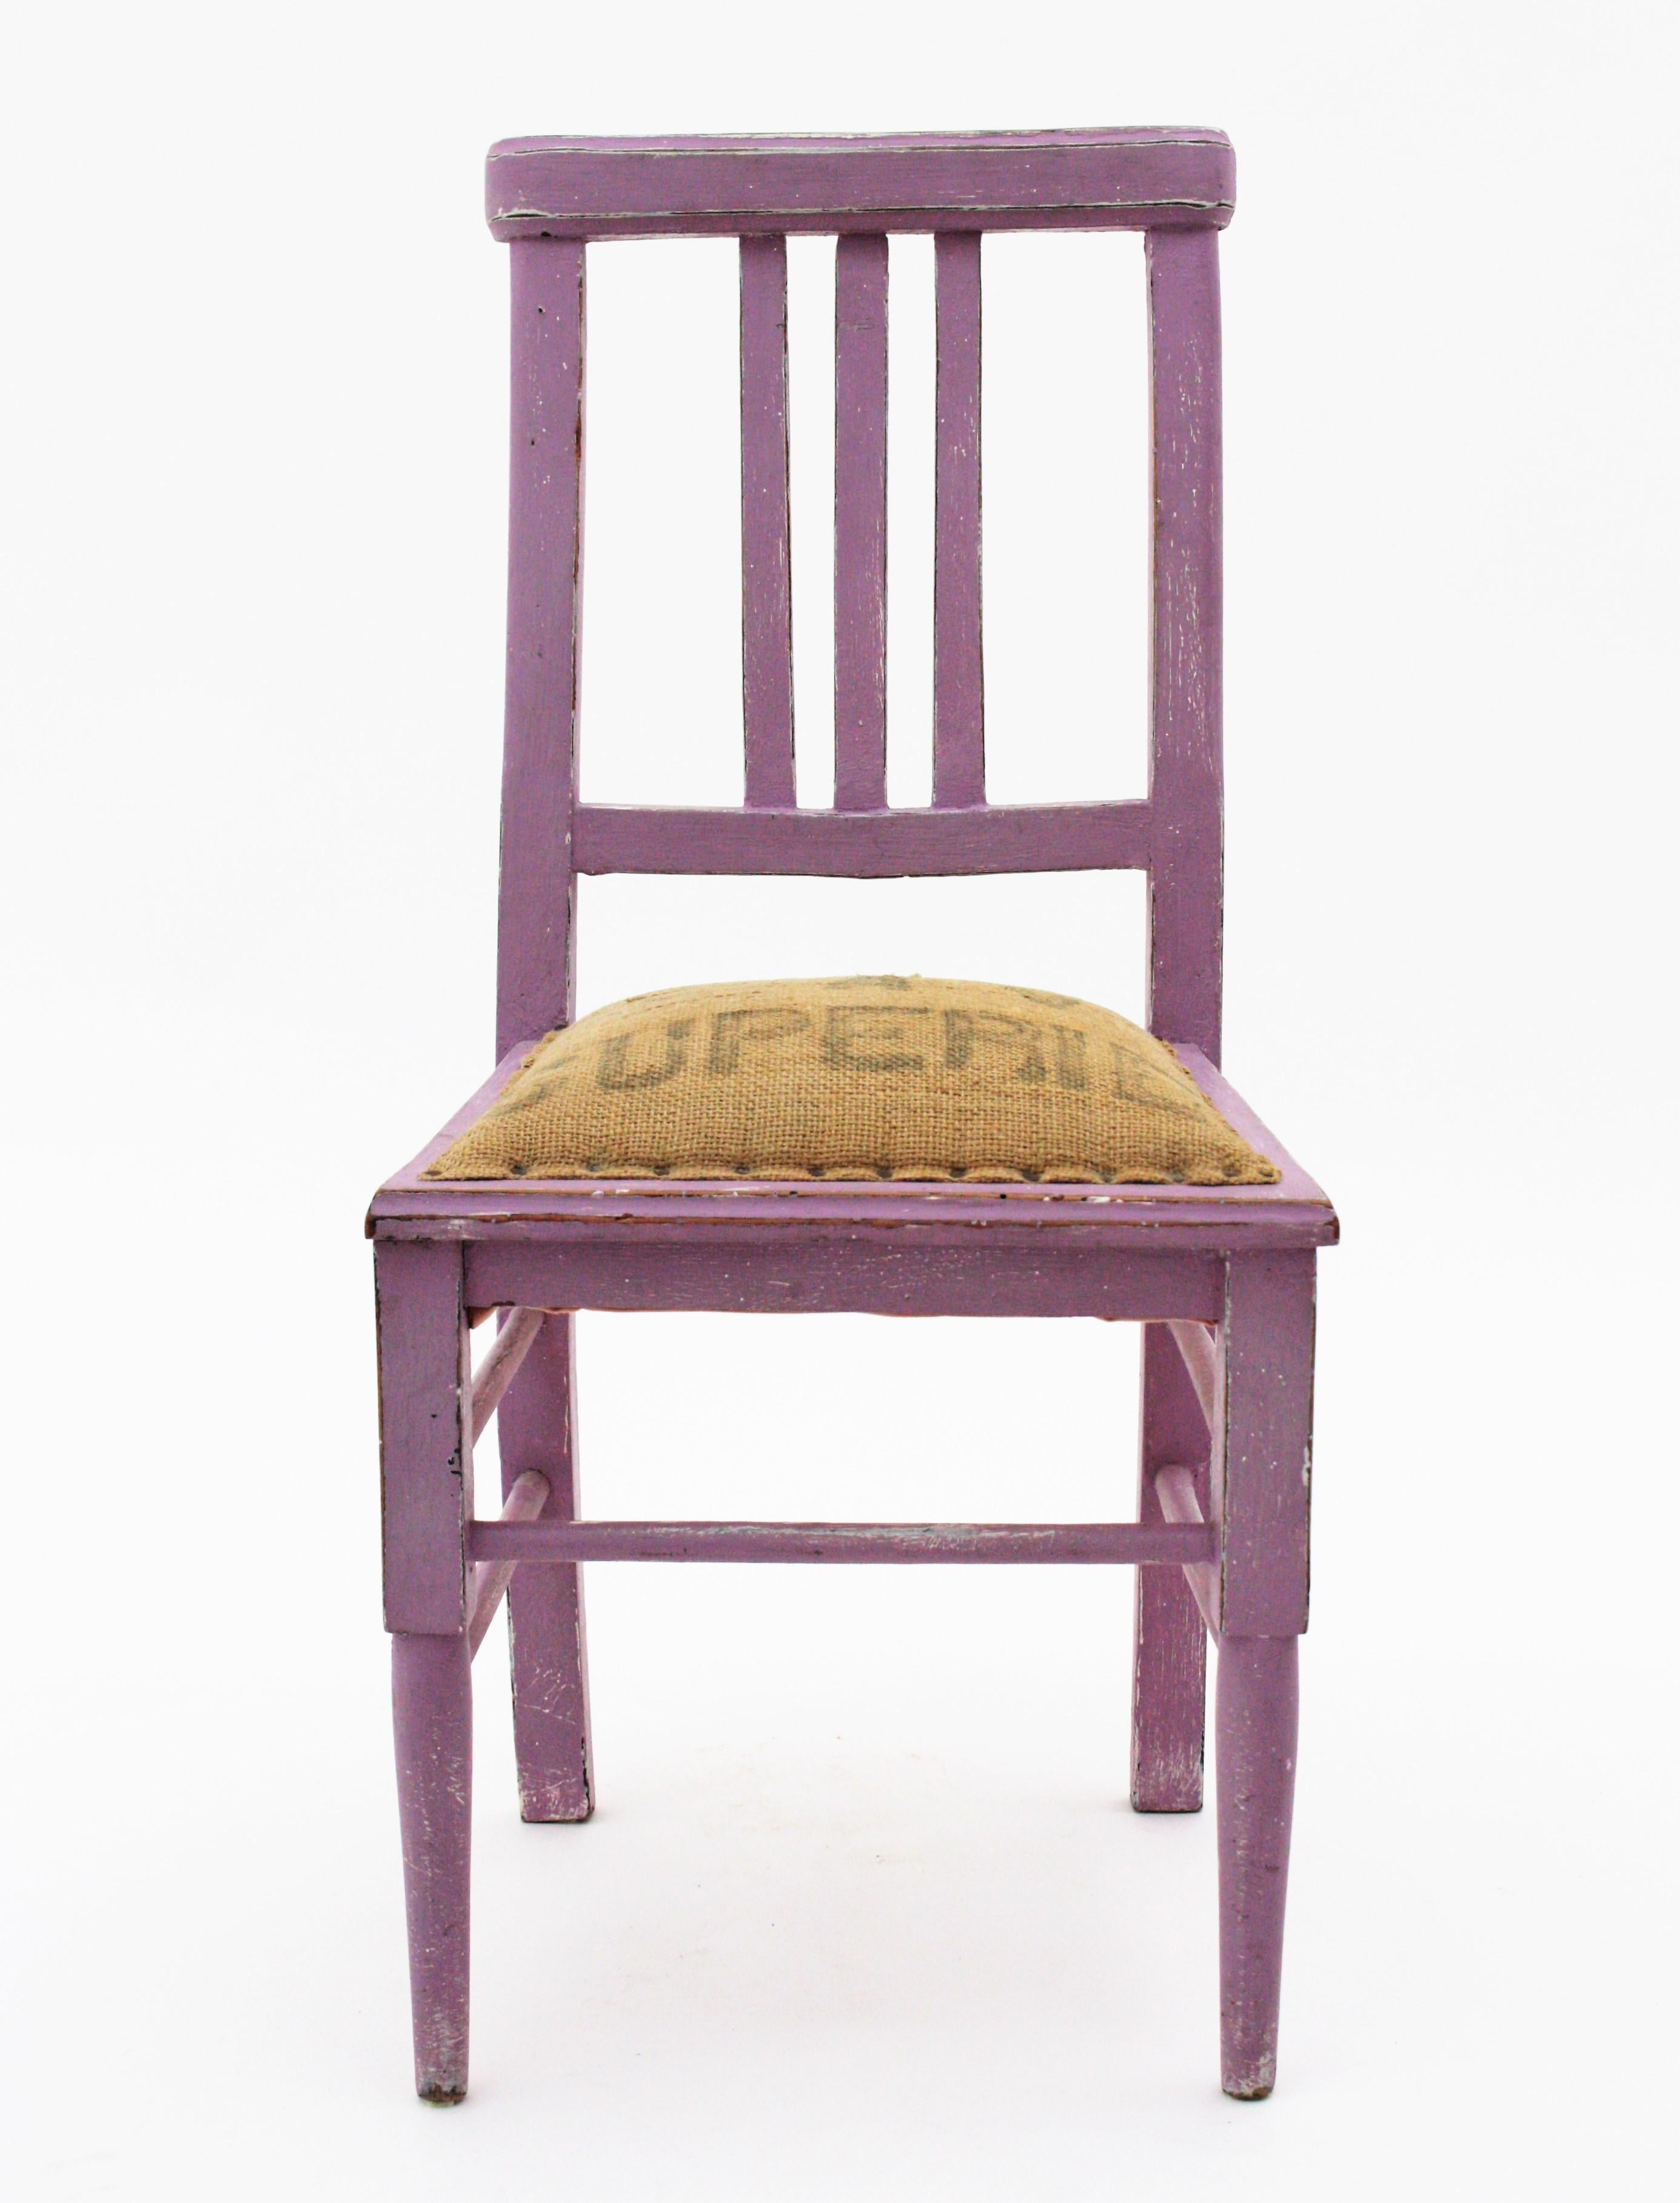 Hand-Painted French Provencal Kids Chair in Lavender Patina and Burlap Seat For Sale